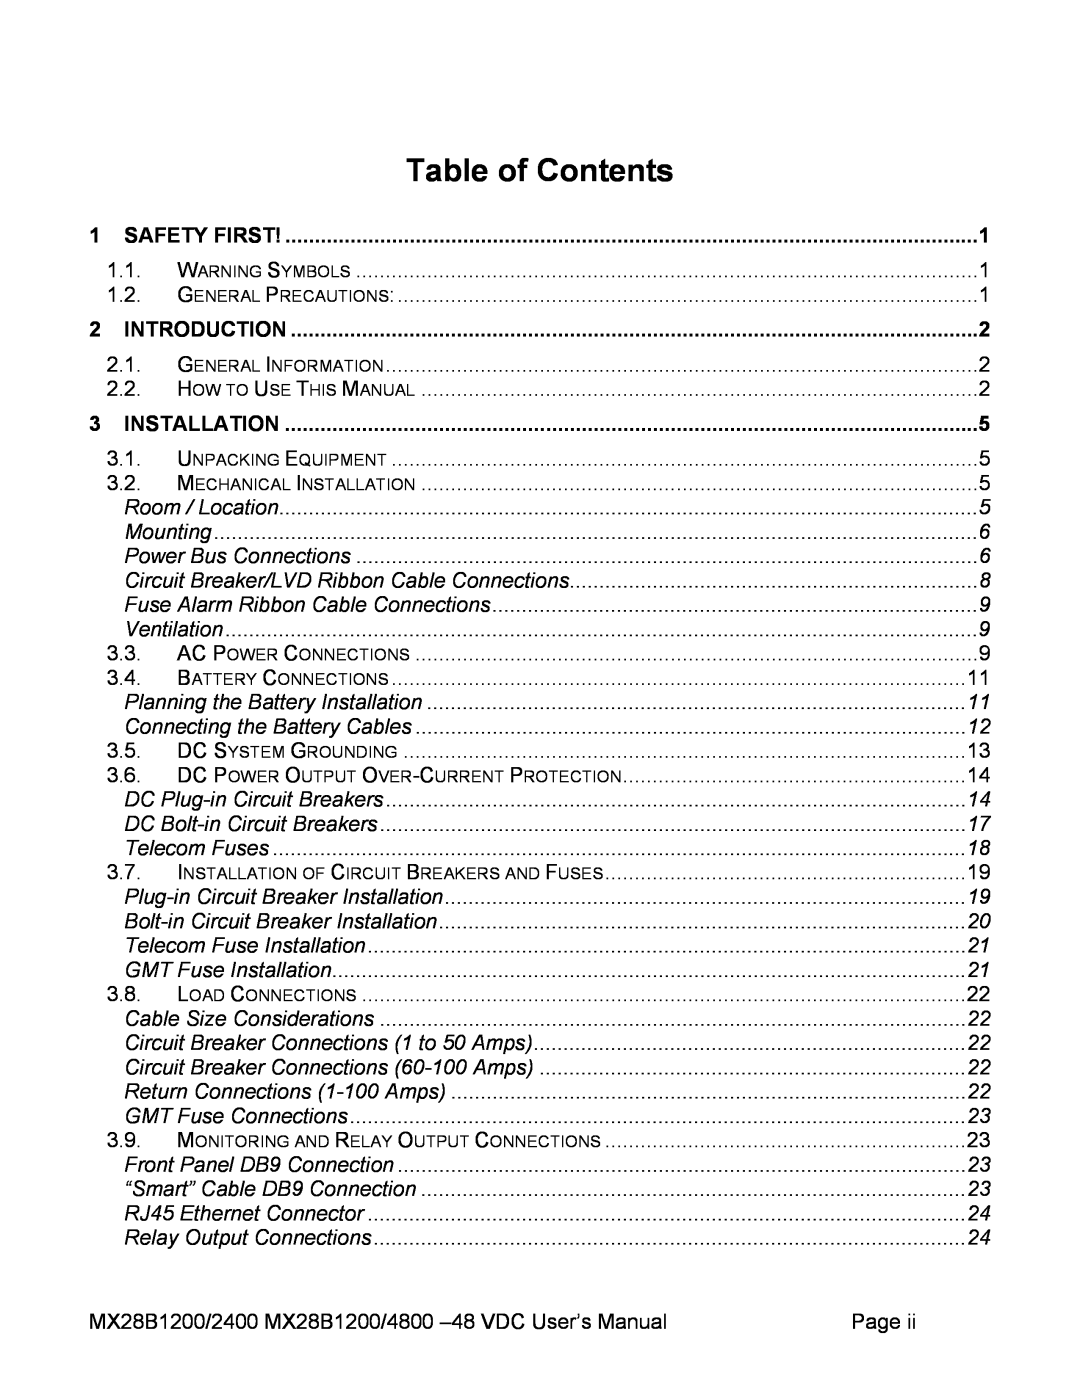 American Power Conversion MX28B4800, MX28B2400 manual Table of Contents 